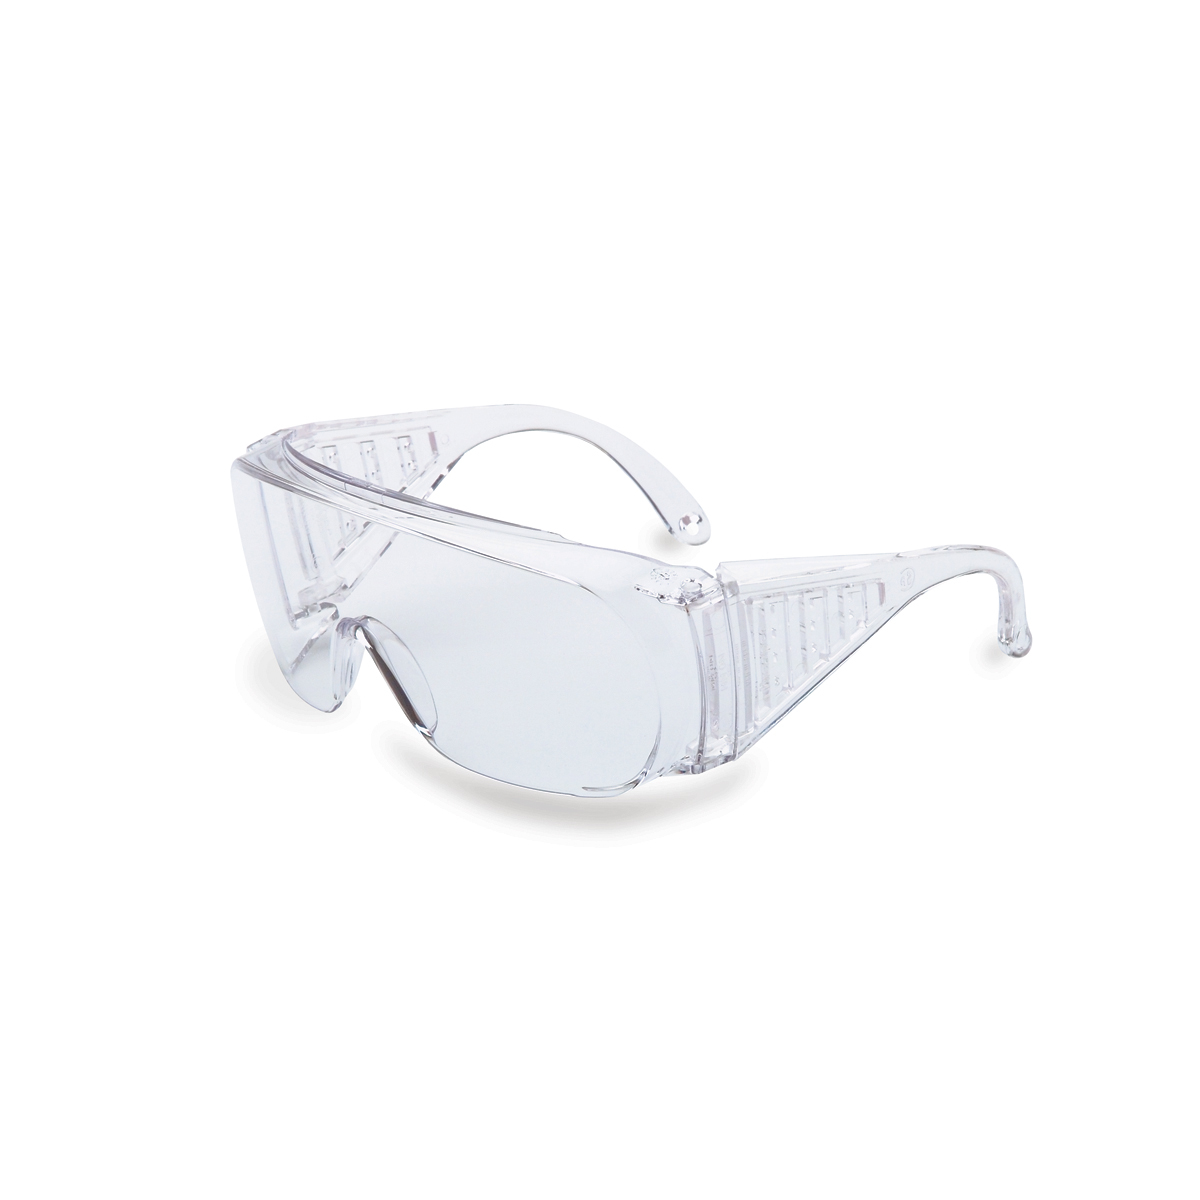 Honeywell Uvex Ultraspec 2000 Clear Safety Glasses With Clear Antifog Lens Availability